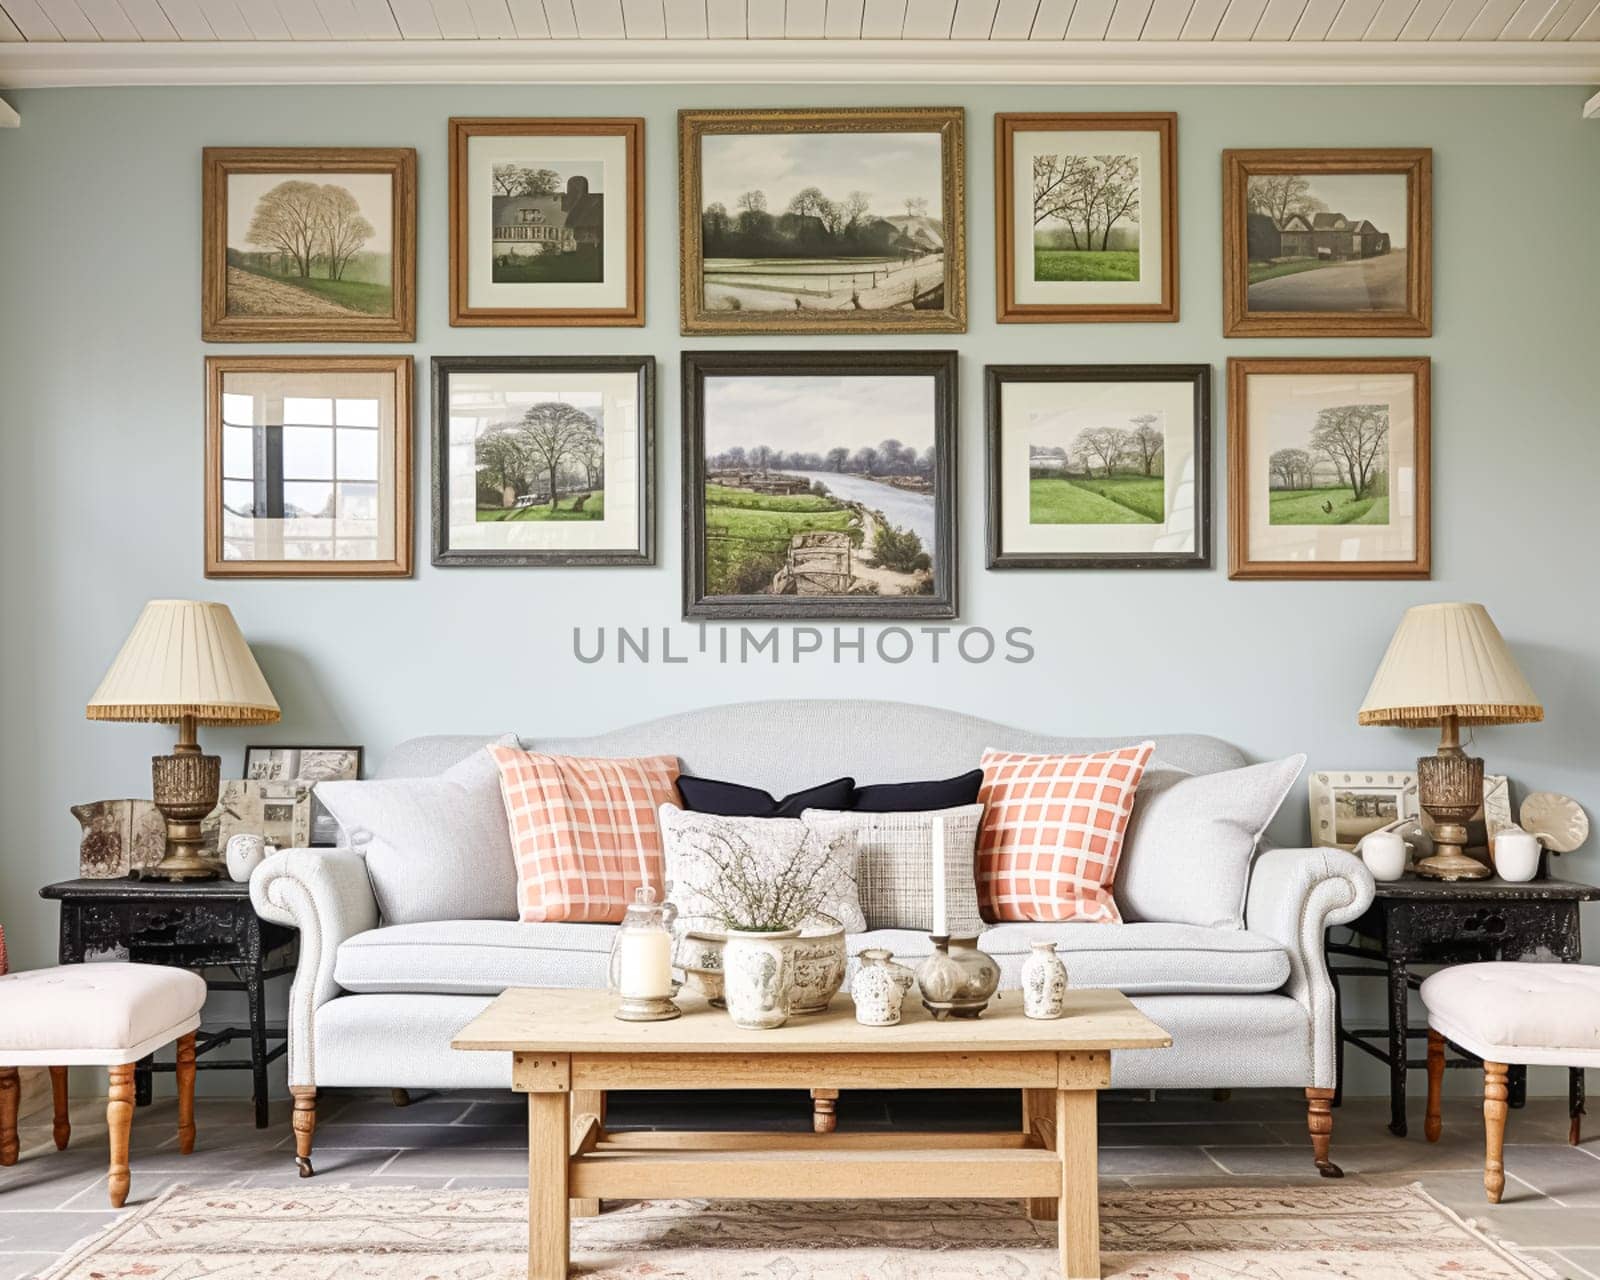 Gallery wall, home decor and wall art over sofa, framed art in modern English country cottage sitting room interior, living room for diy printable artwork and print shop by Anneleven